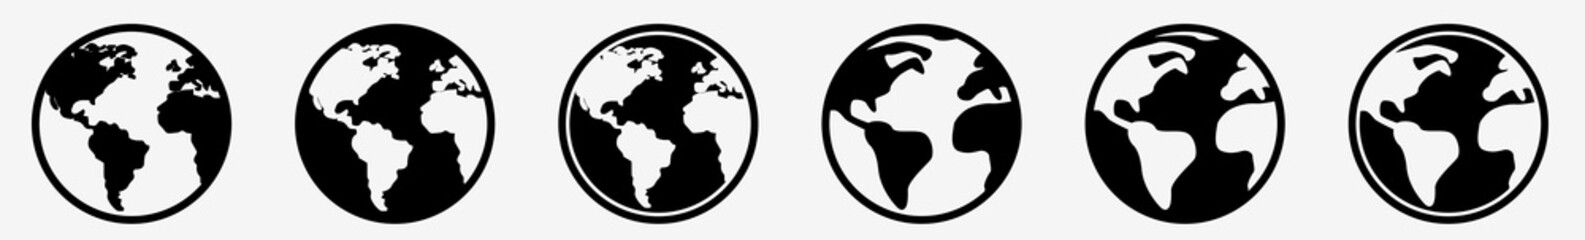 Planet Earth Icon Set | World Globe Vector Illustration Logo | Earth Globe Icons Isolated Collection